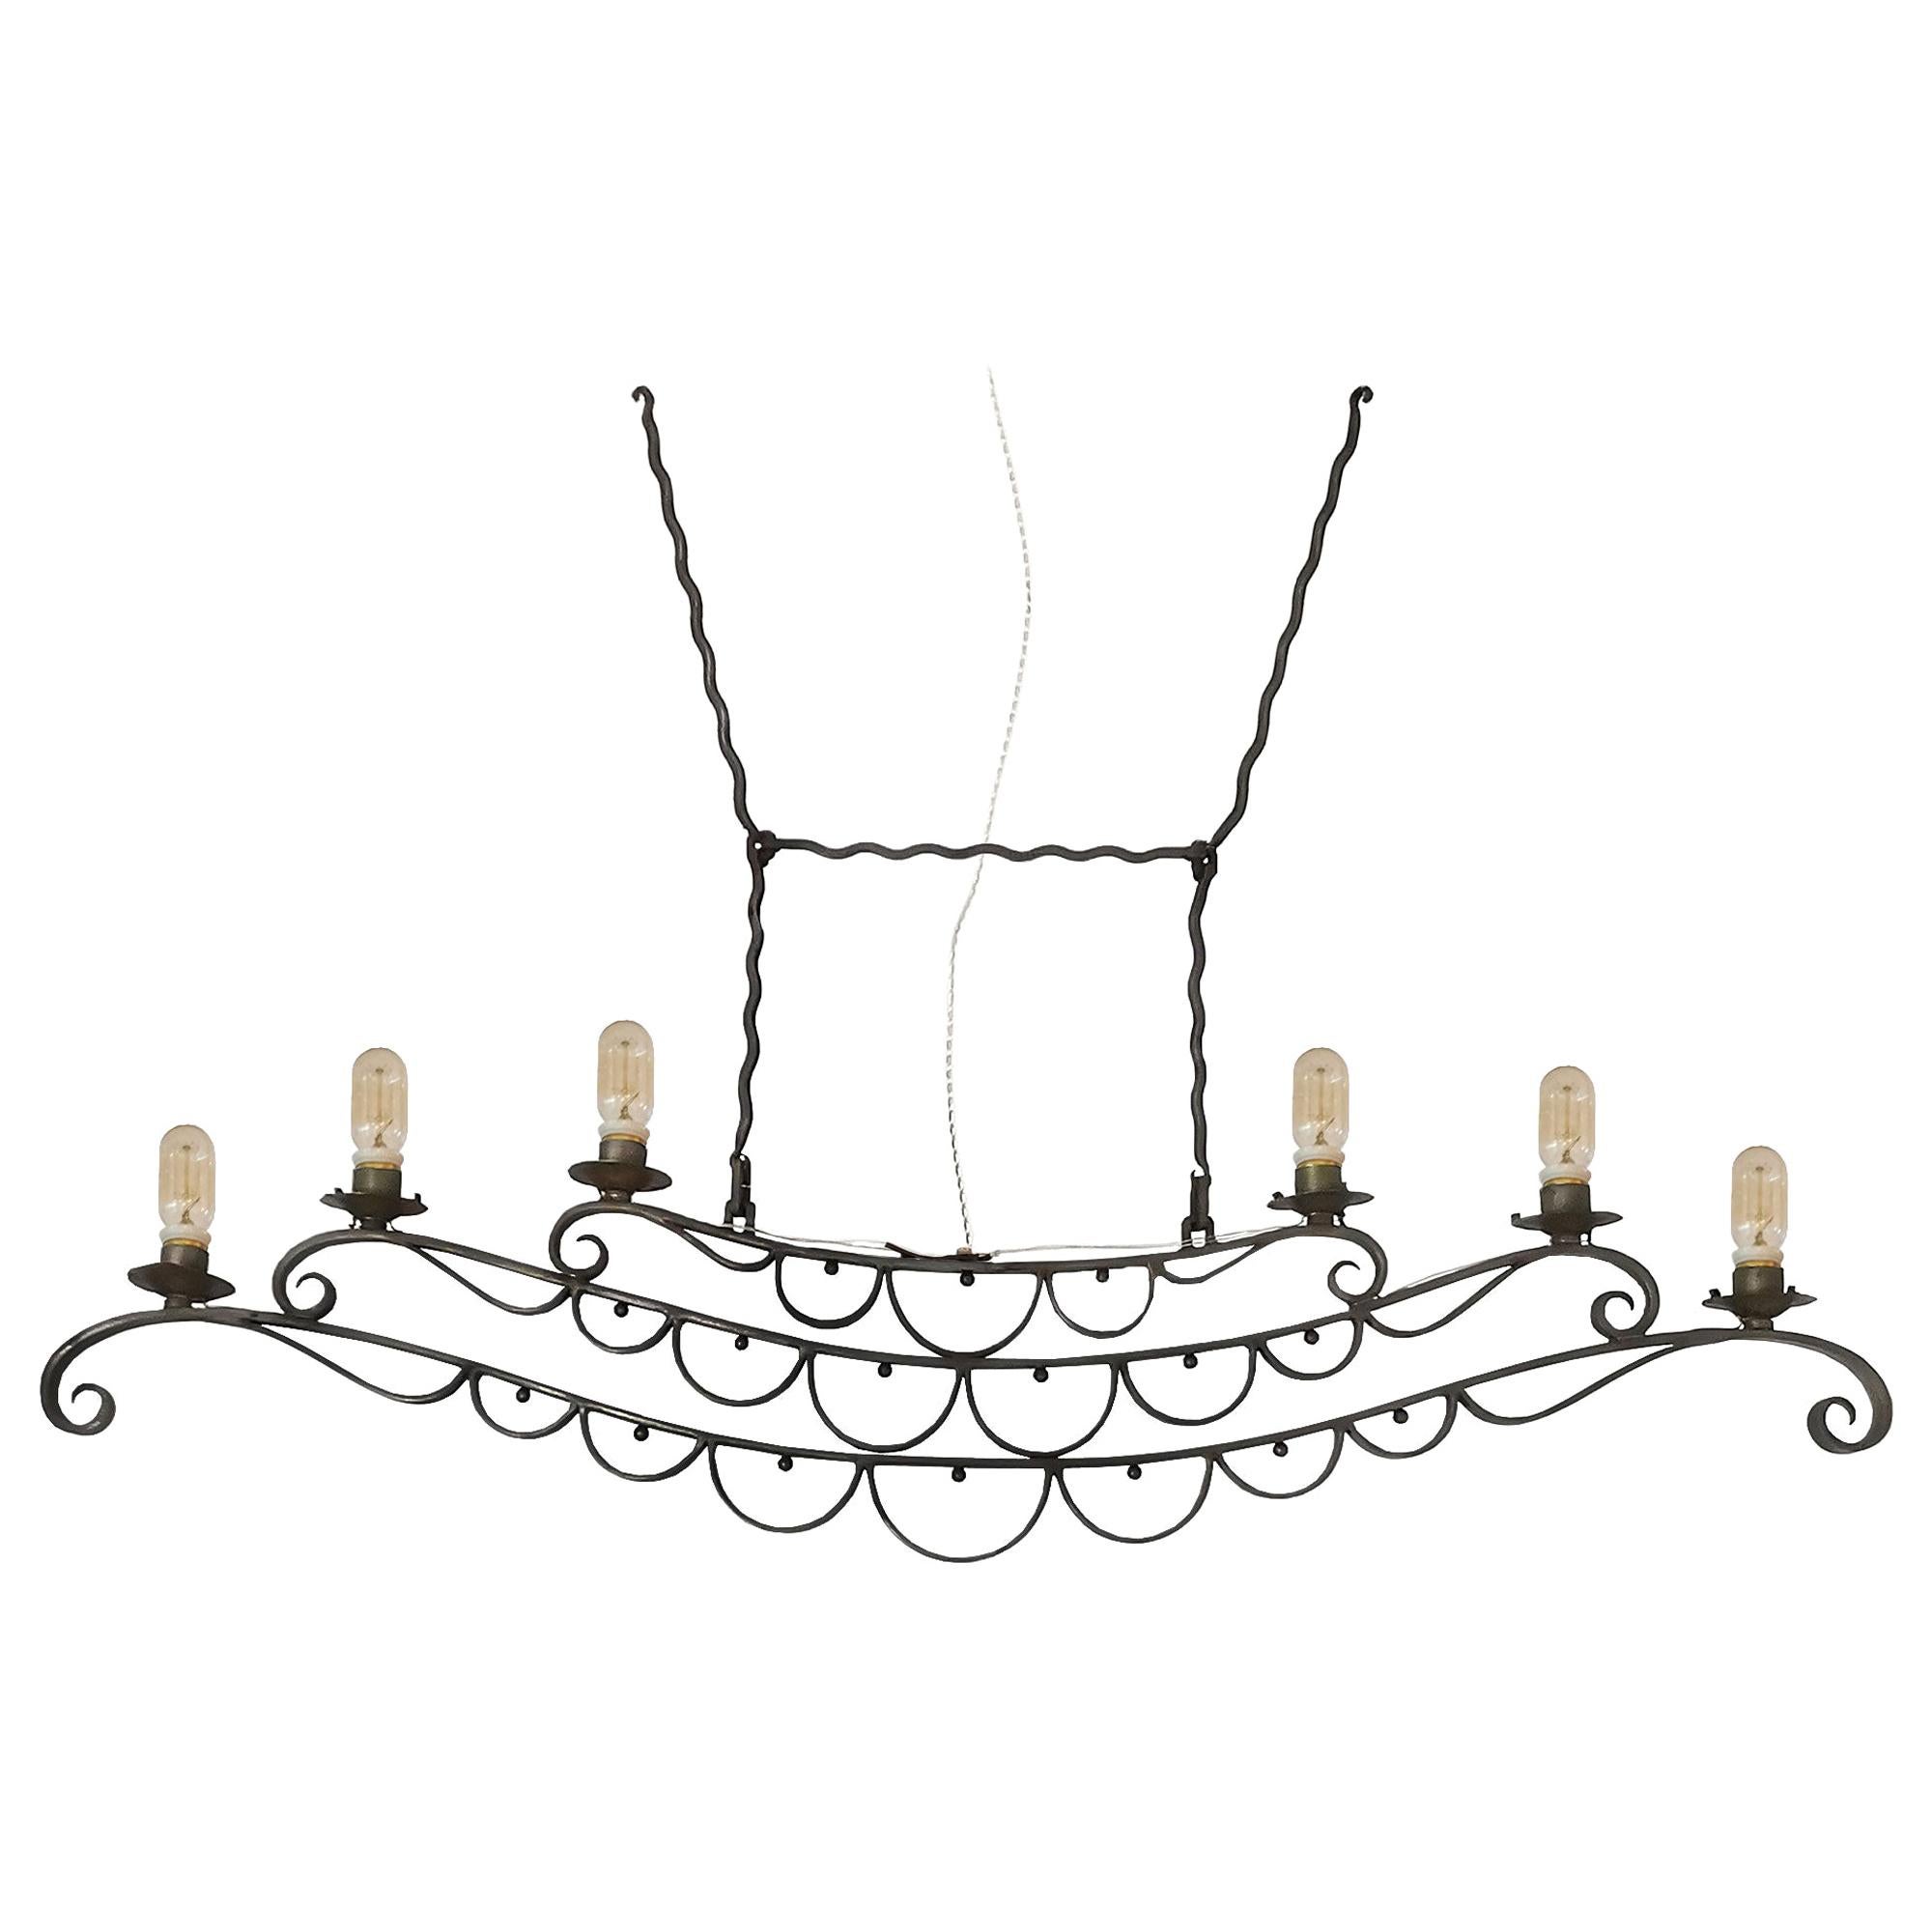 1890-1900 Large Ceiling Light in Wrought Iron, Oil Lamp, Electrified, France